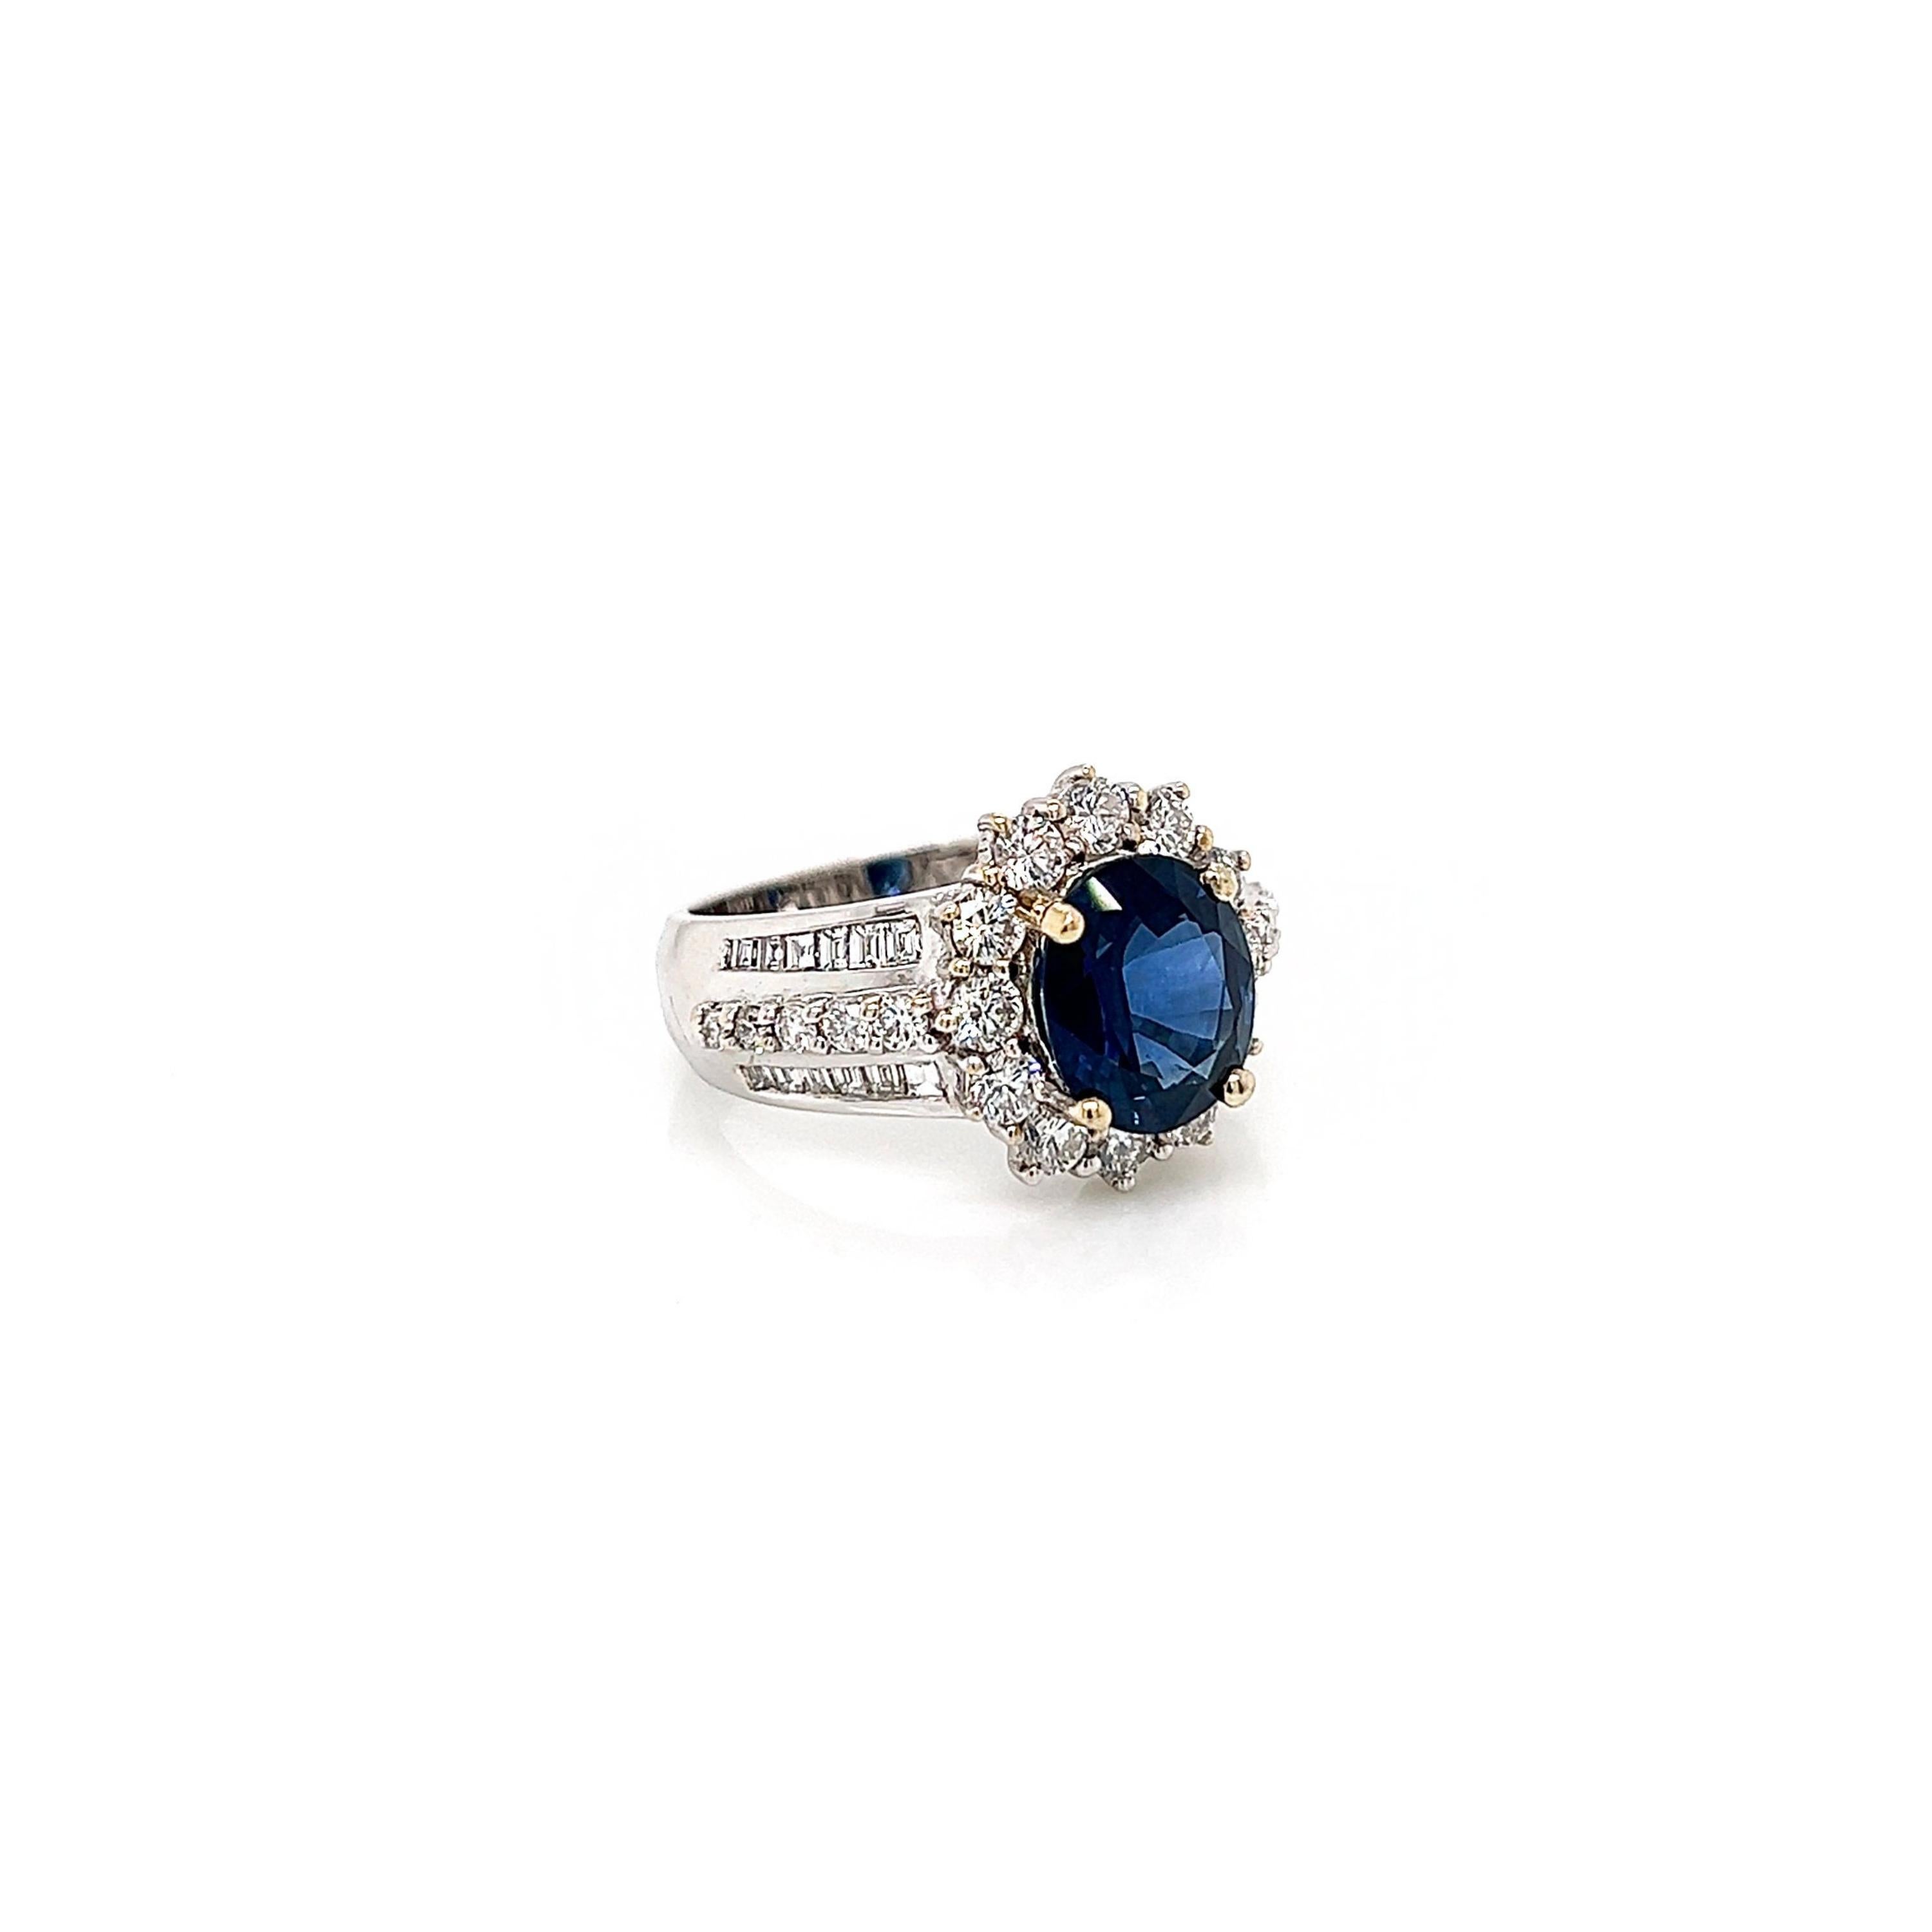 Oval Cut Certified 3.05 Carat Halo Blue Sapphire & 1.3 Ct Diamond Antique Engagement Ring For Sale